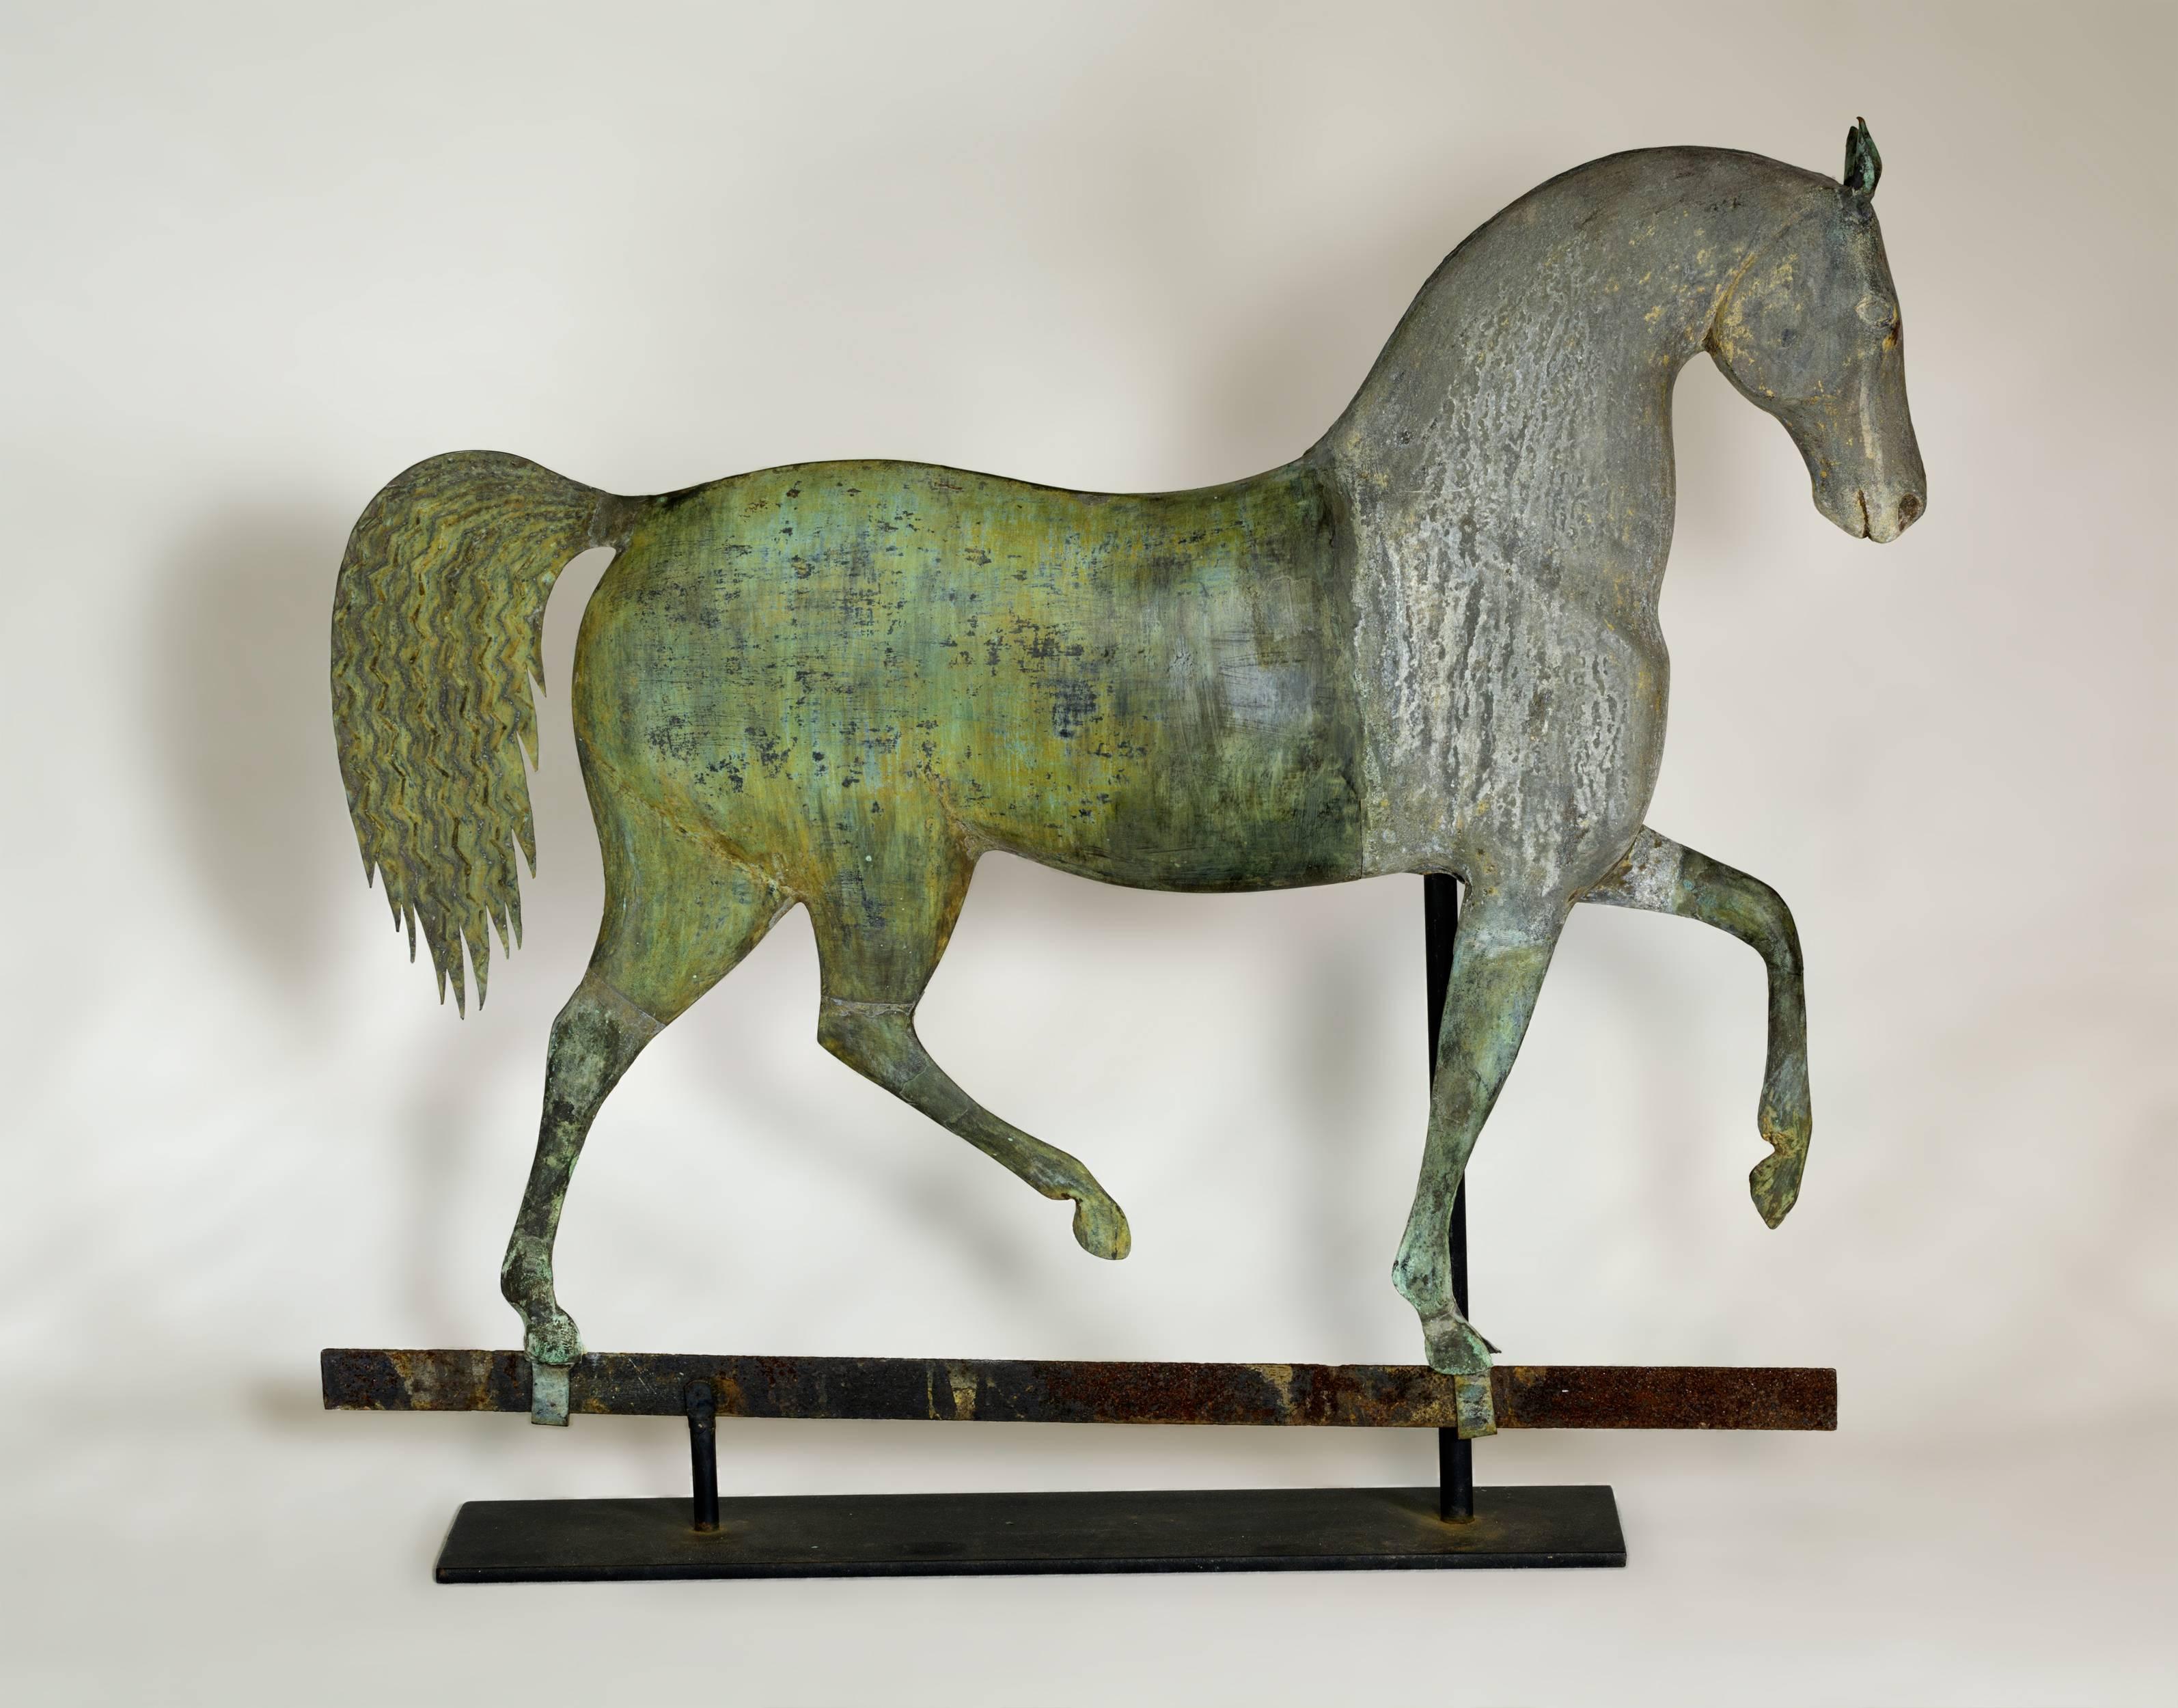 The body is made of casted zinc with molded hollow copper mid and hind sections with applied copper ears, mane and unusual waffle style corrugated tail. Sits on its original strap base. Original condition with strong verdigris and weathered gilt.